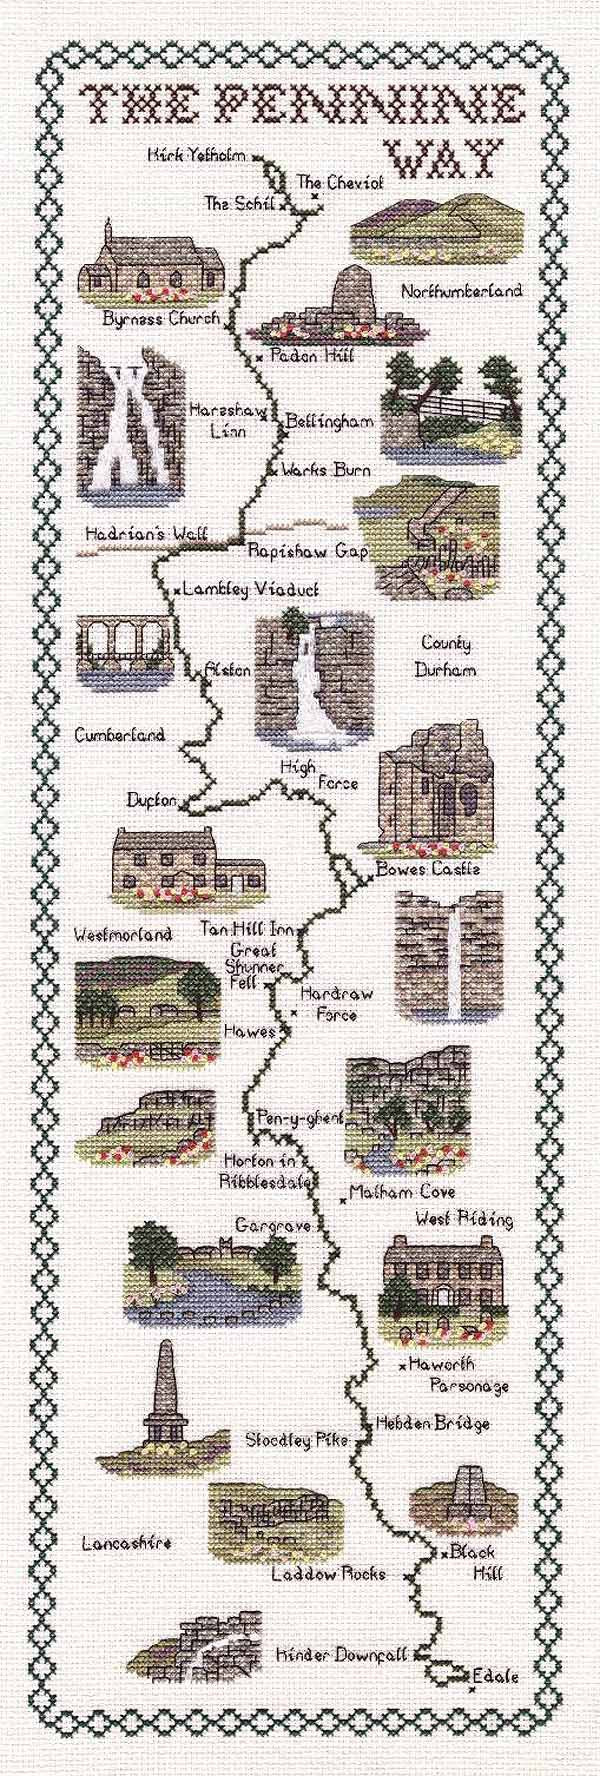 Pennine Way Map Cross Stitch Kit by Classic Embroidery